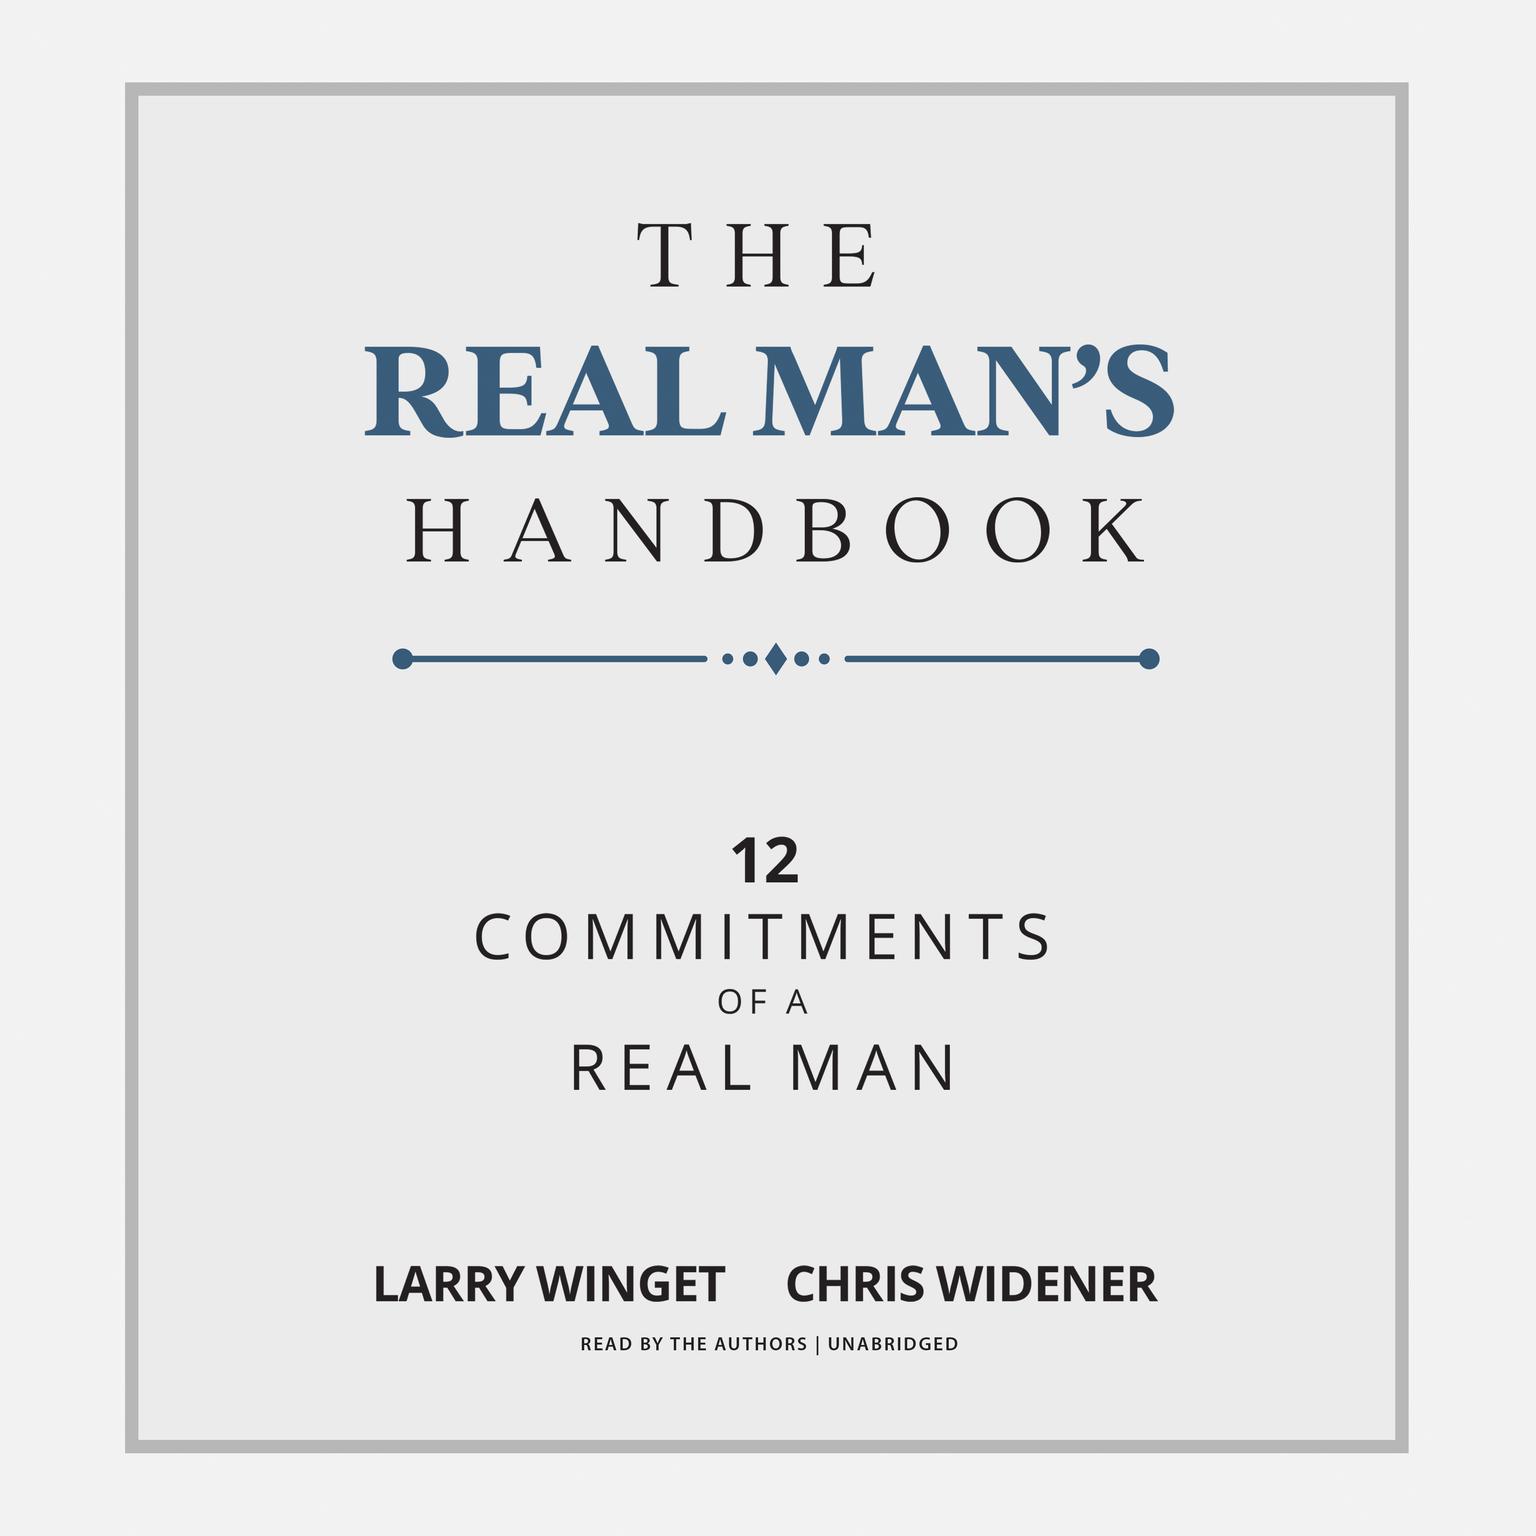 The Real Man’s Handbook: 12 Commitments of a Real Man Audiobook, by Larry Winget